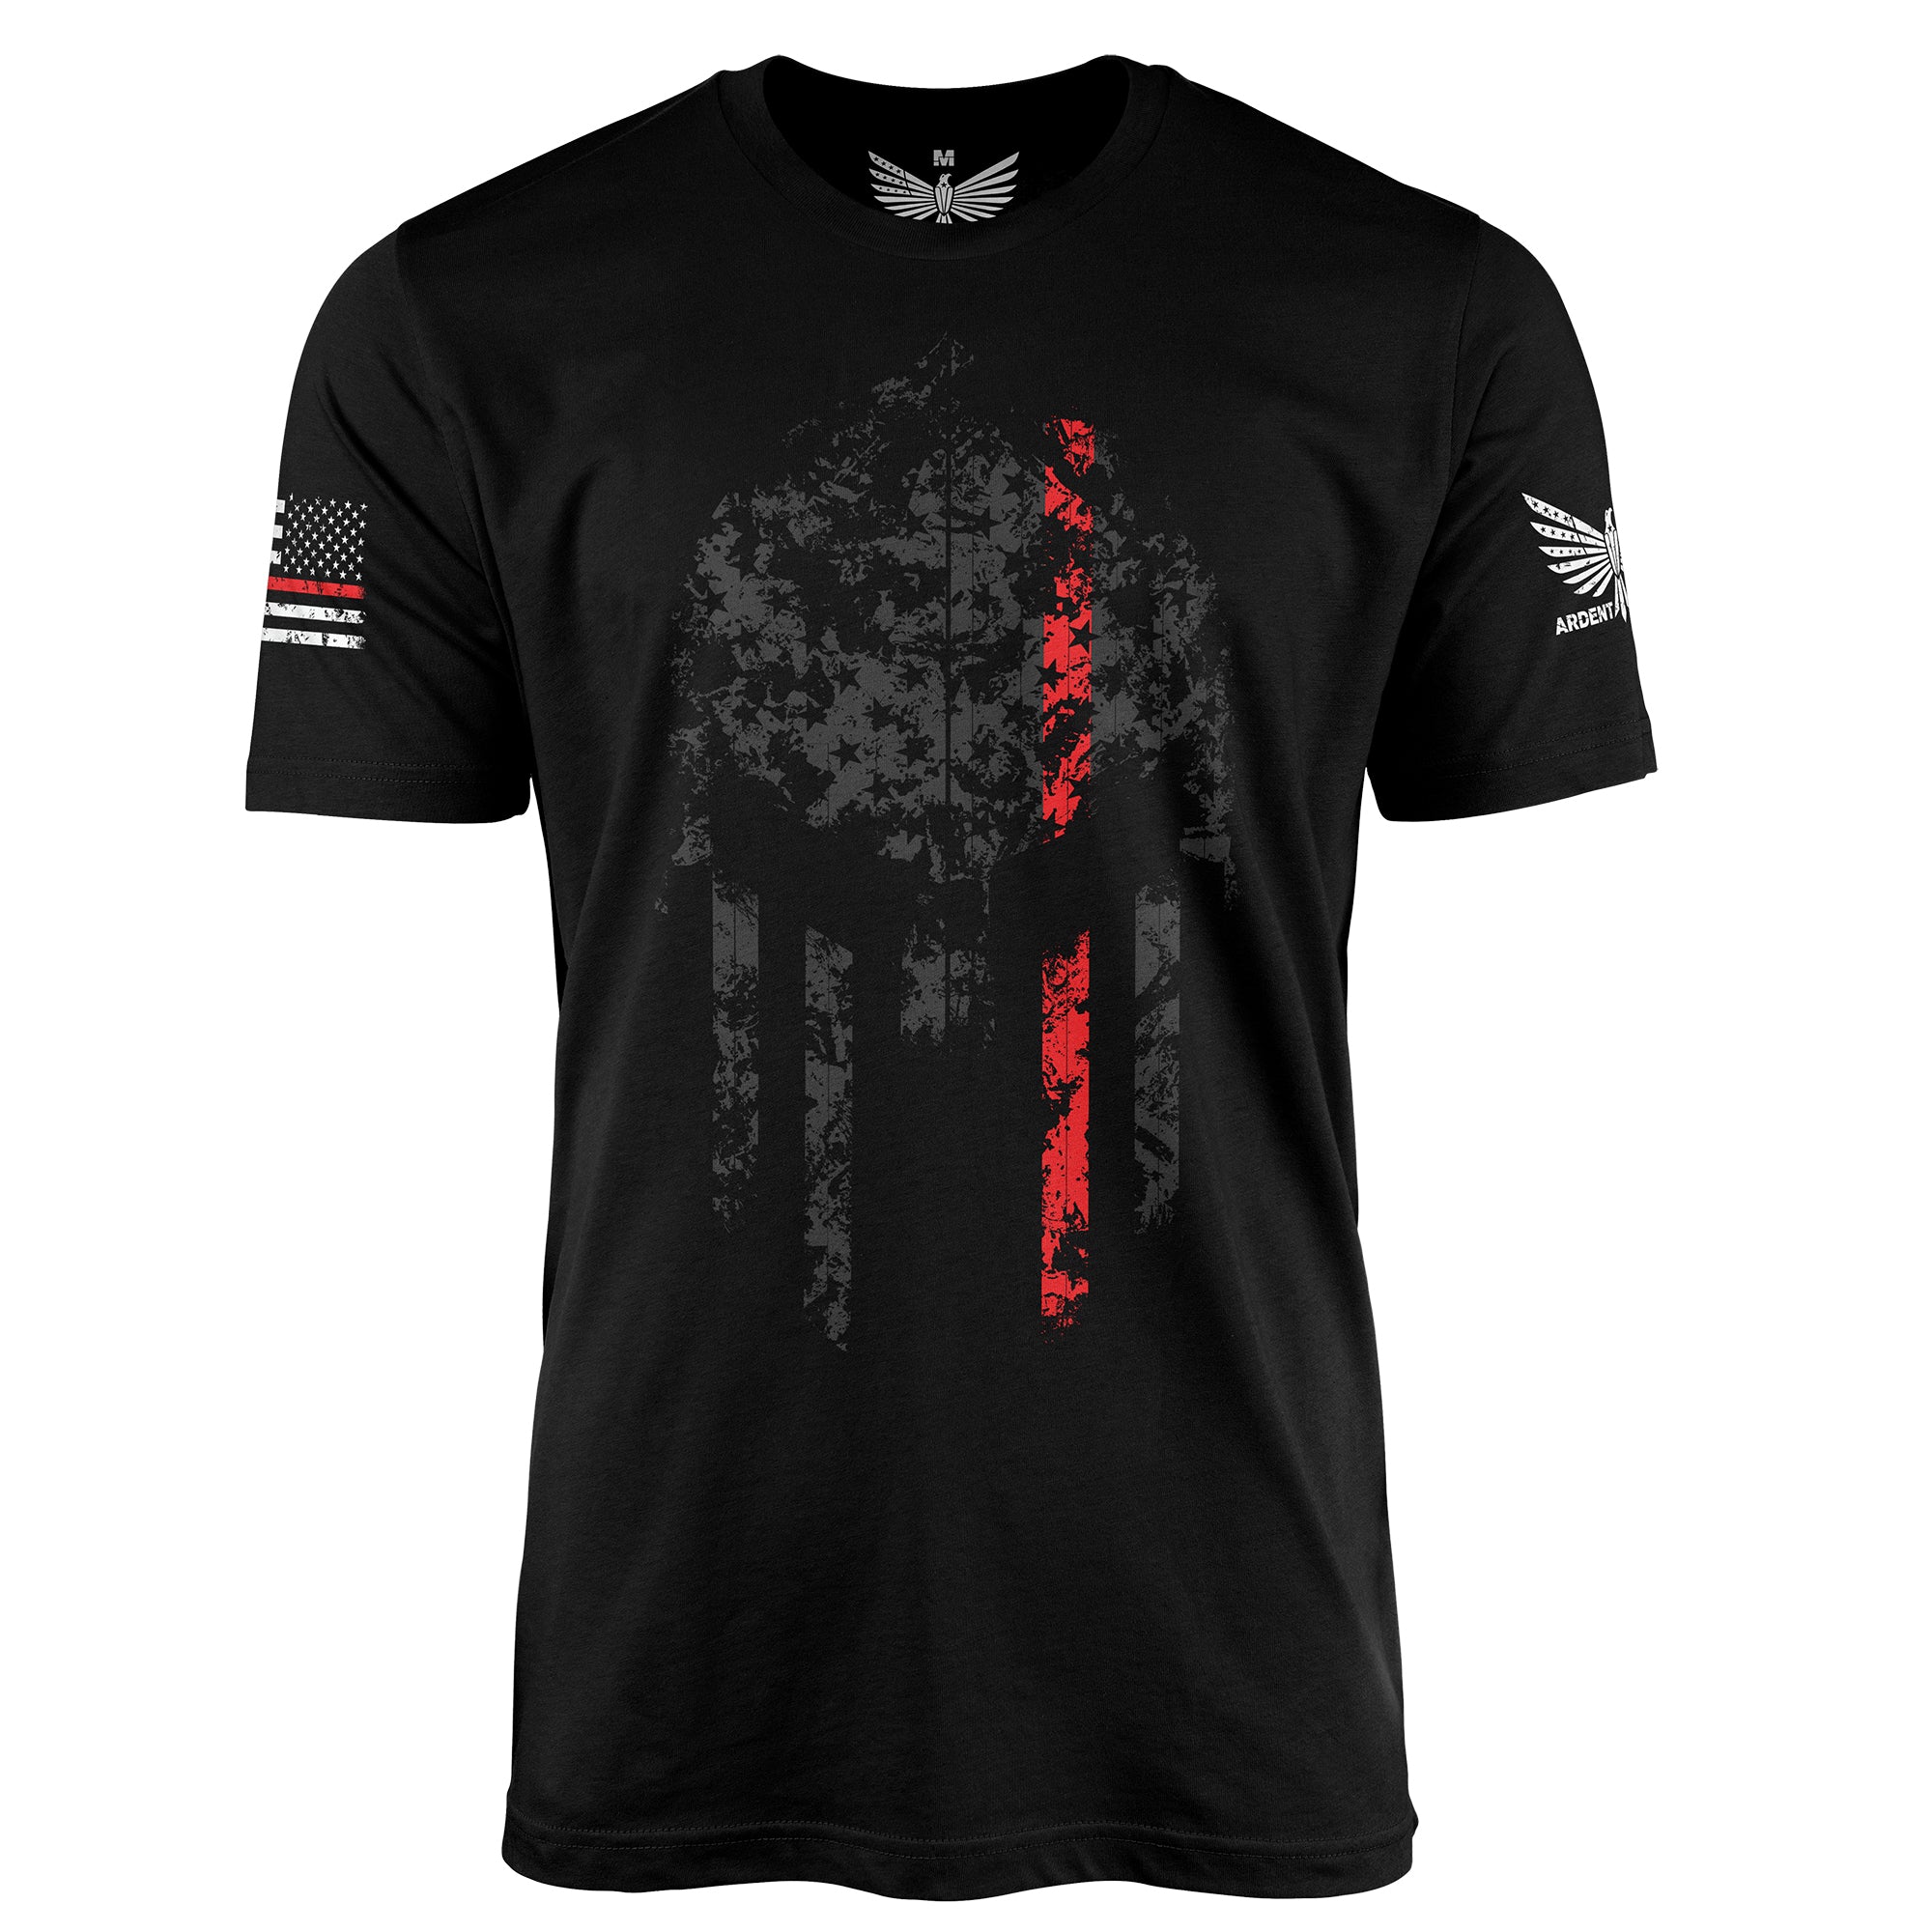 Thin Red Line Spartan-Men's Shirt-S-Ardent Patriot Apparel Co.